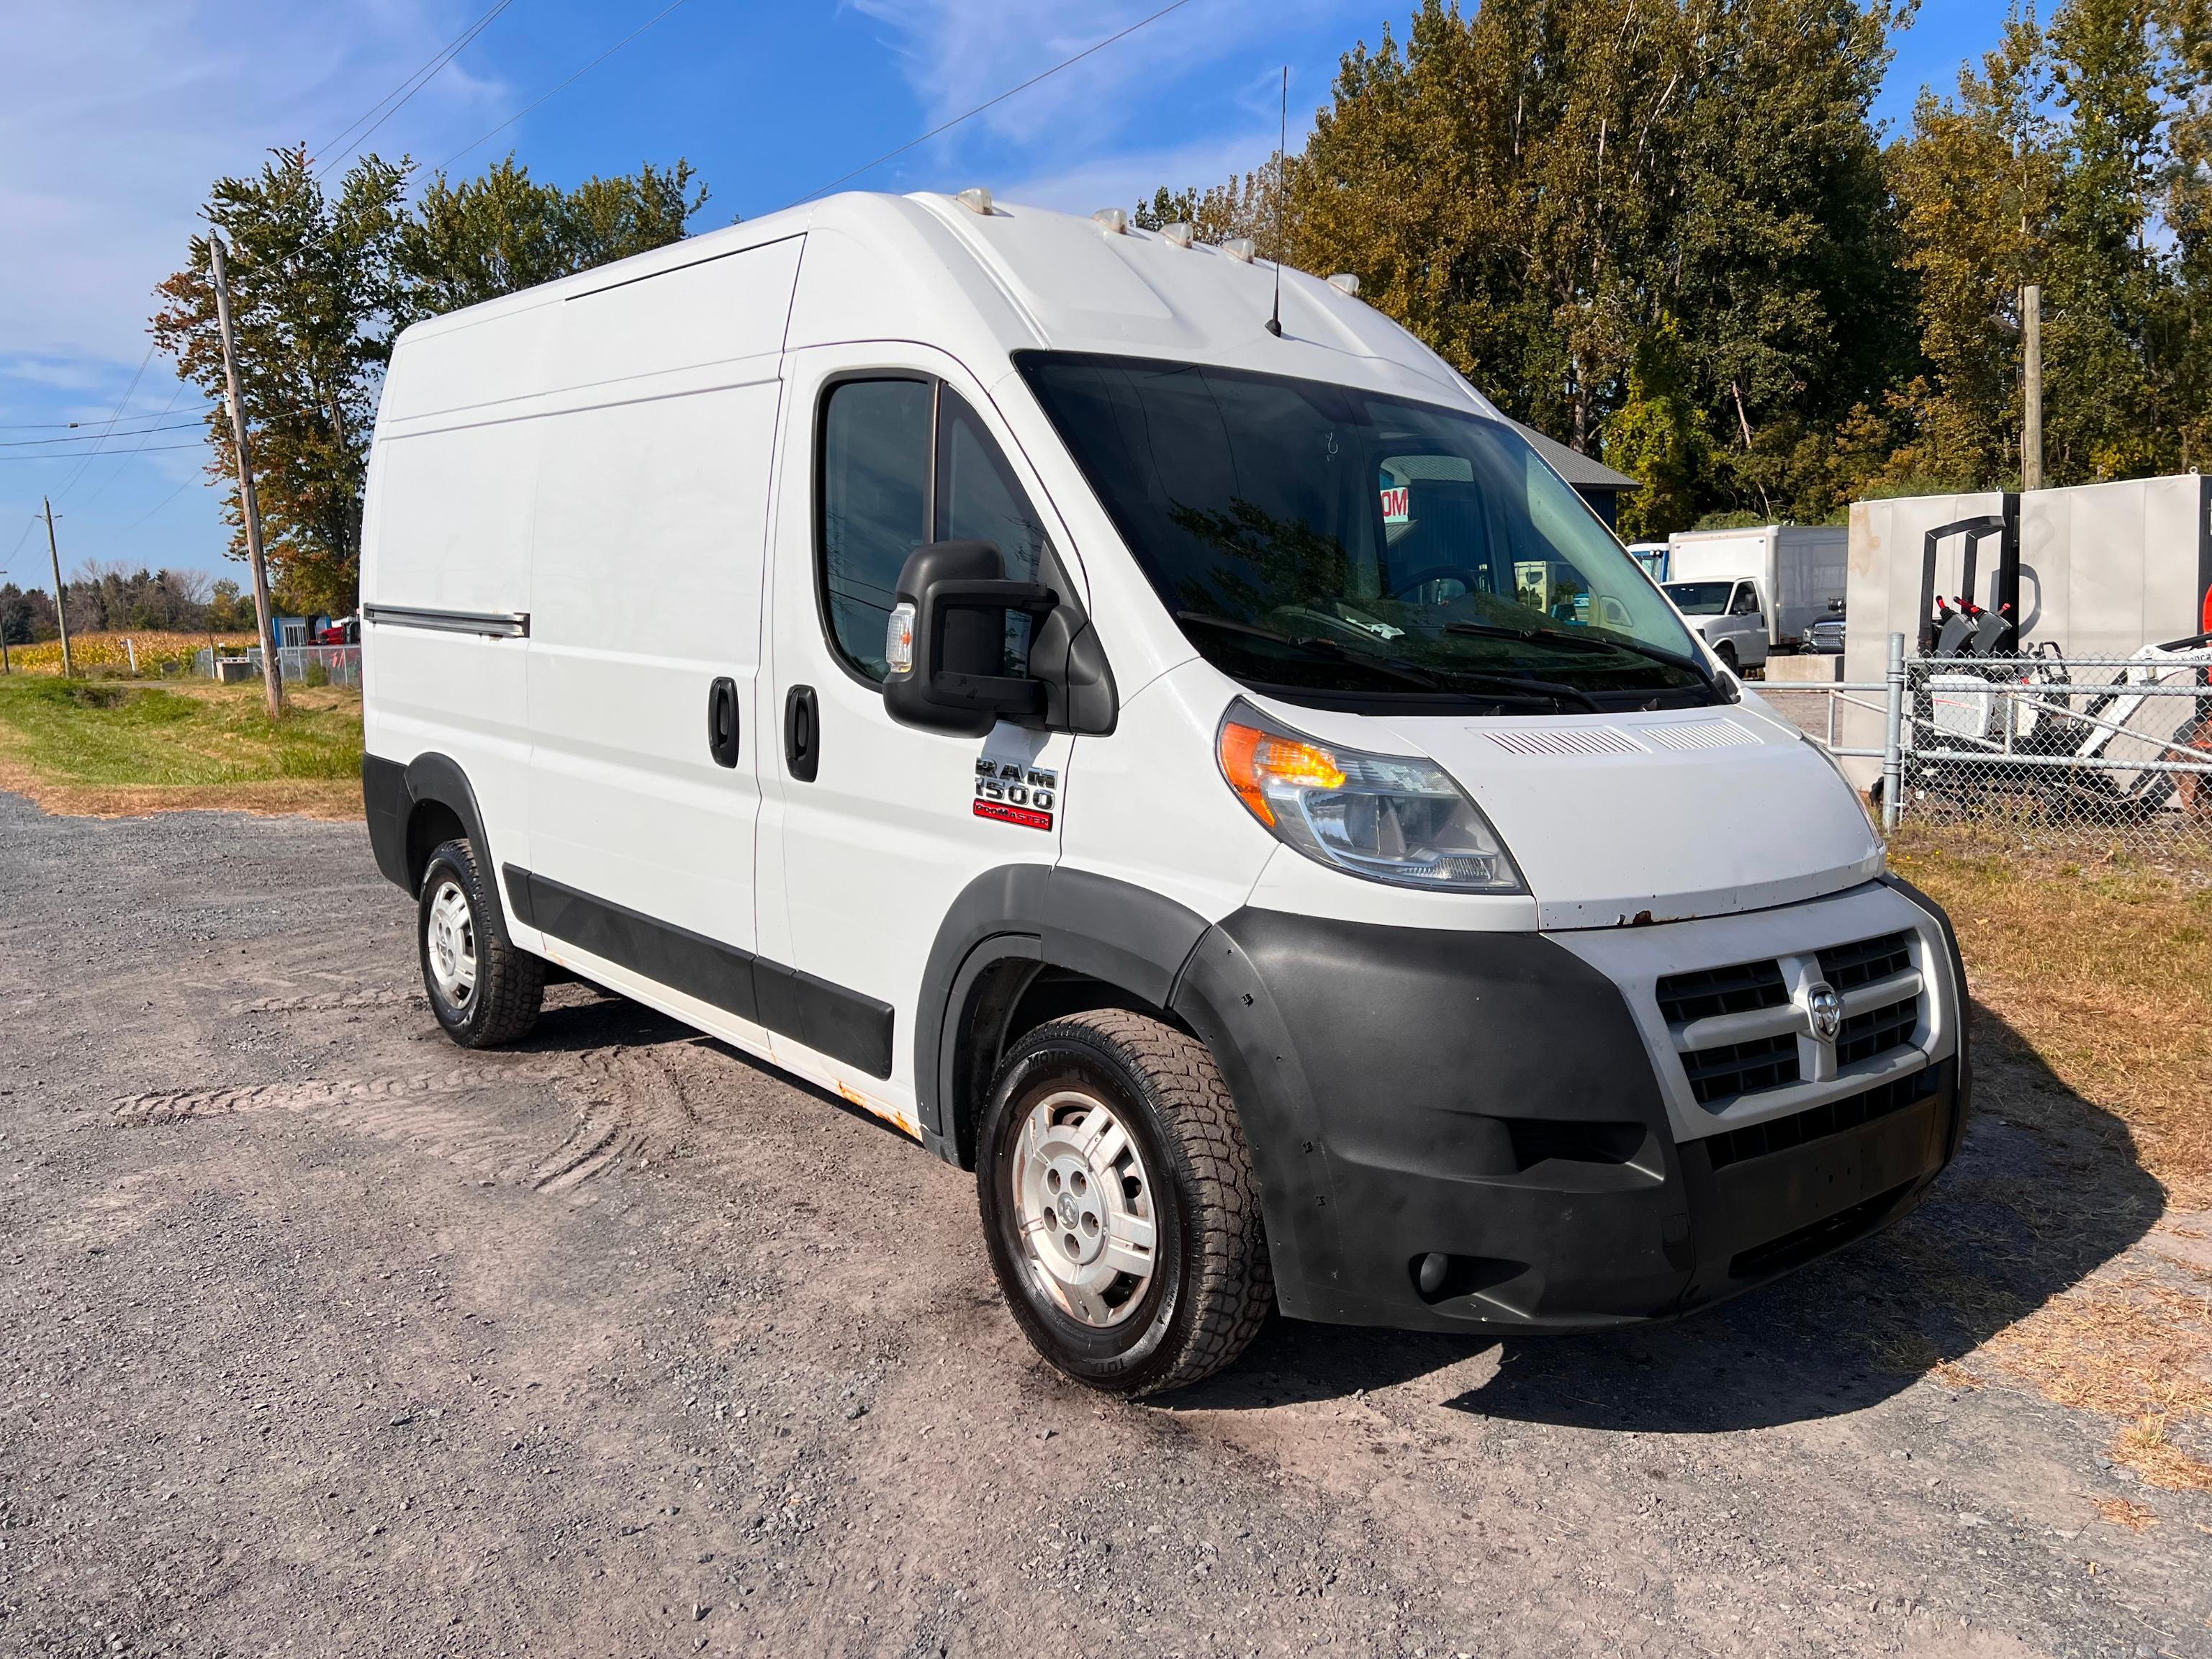 SERVICE TRUCK 2014 RAM PROMASTER SERVICE TRUCK powered by Dodge 3.6 gas engine, a/c heat cab,